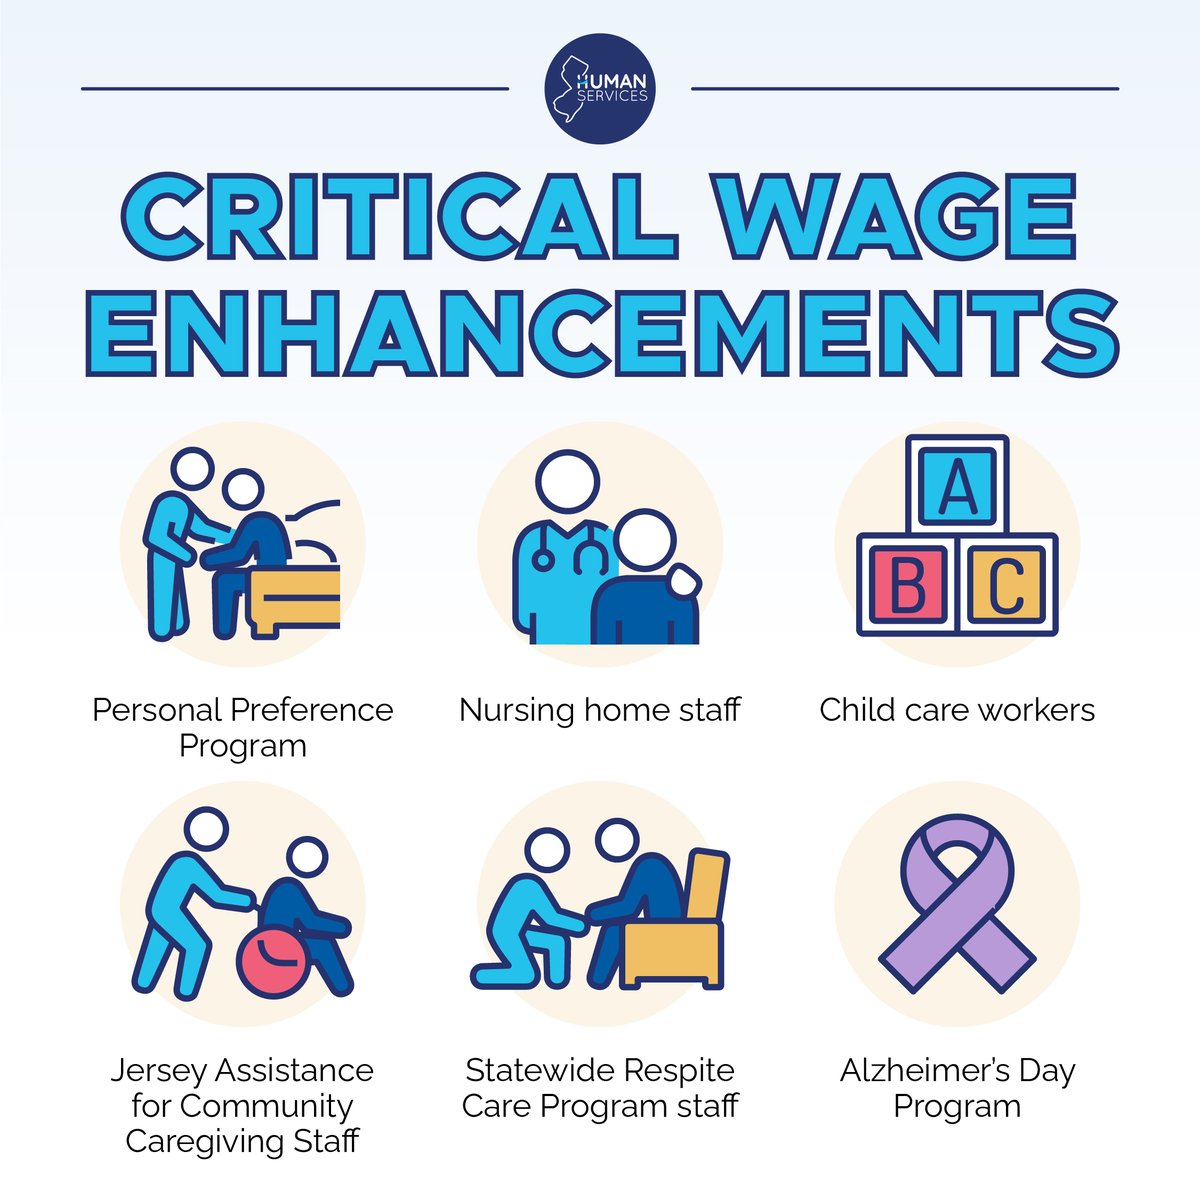 .@GovMurphy’s budget continues critical wage enhancements for vital workers.